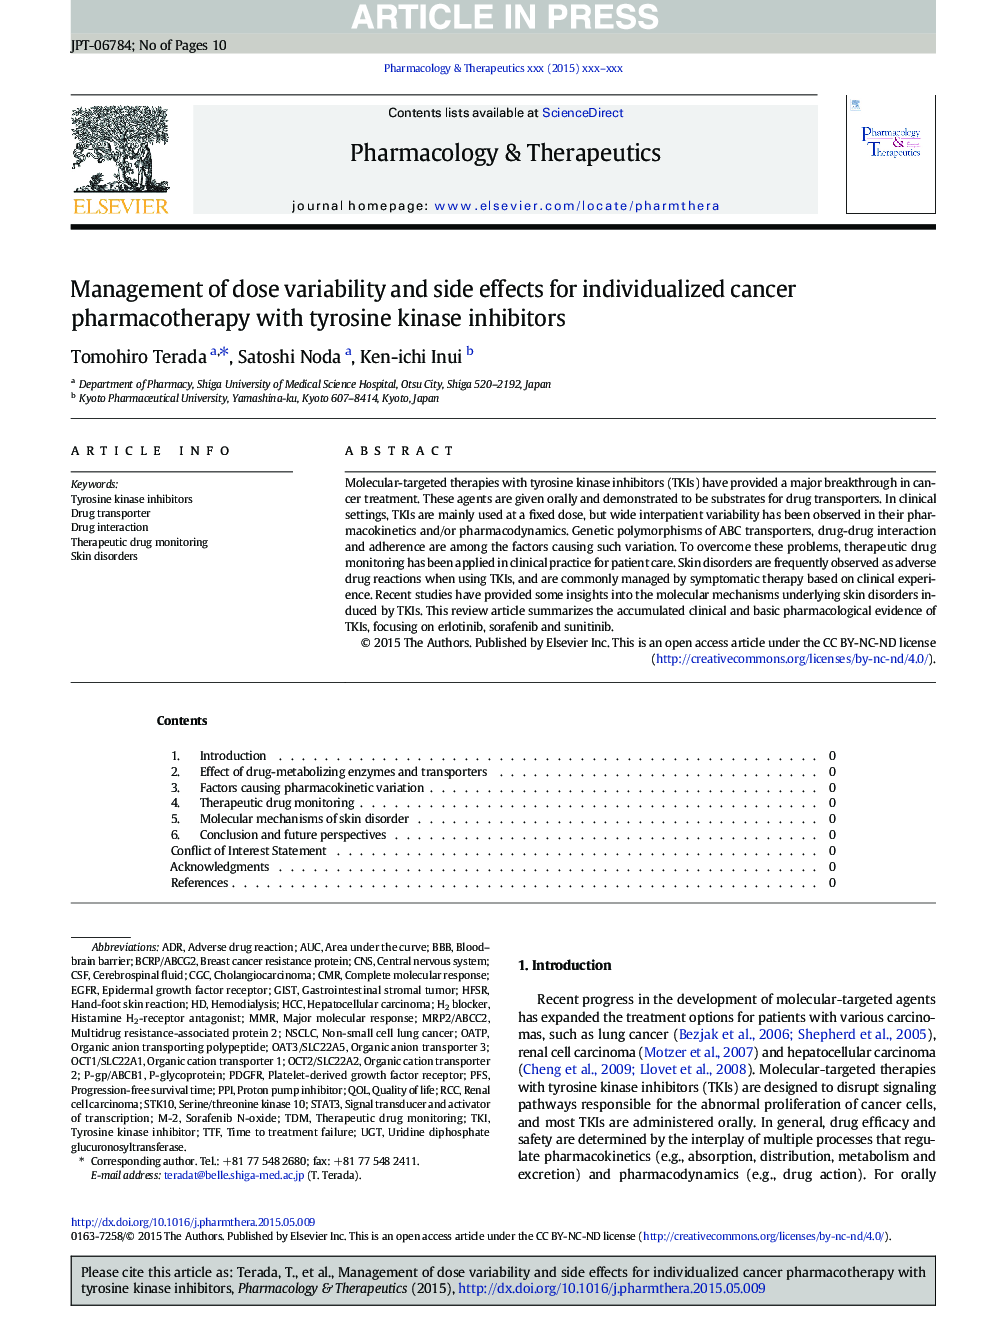 Management of dose variability and side effects for individualized cancer pharmacotherapy with tyrosine kinase inhibitors